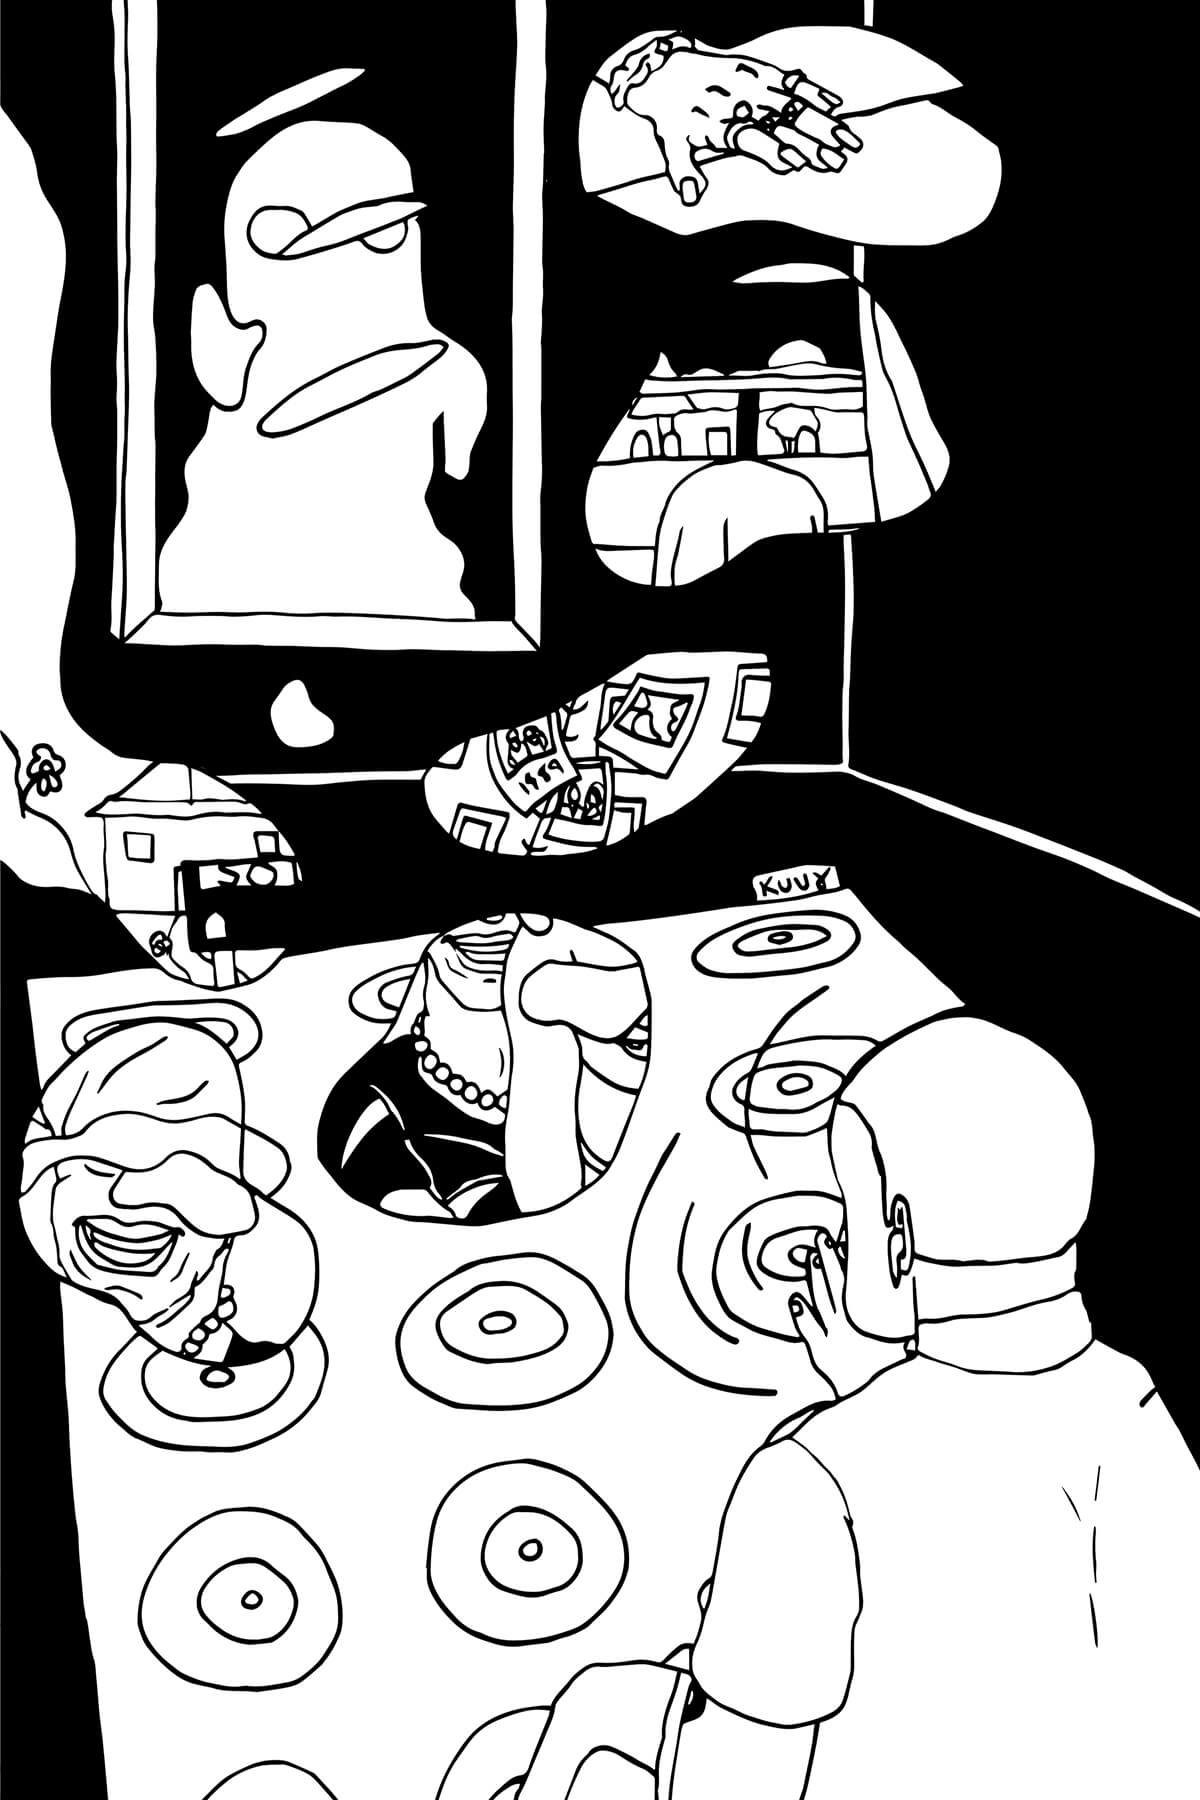 A black and white drawing of a person spinning LPs in a darkened room. There are many records pictured, and from many of them bubbles arise that have small drawings of memories inside.